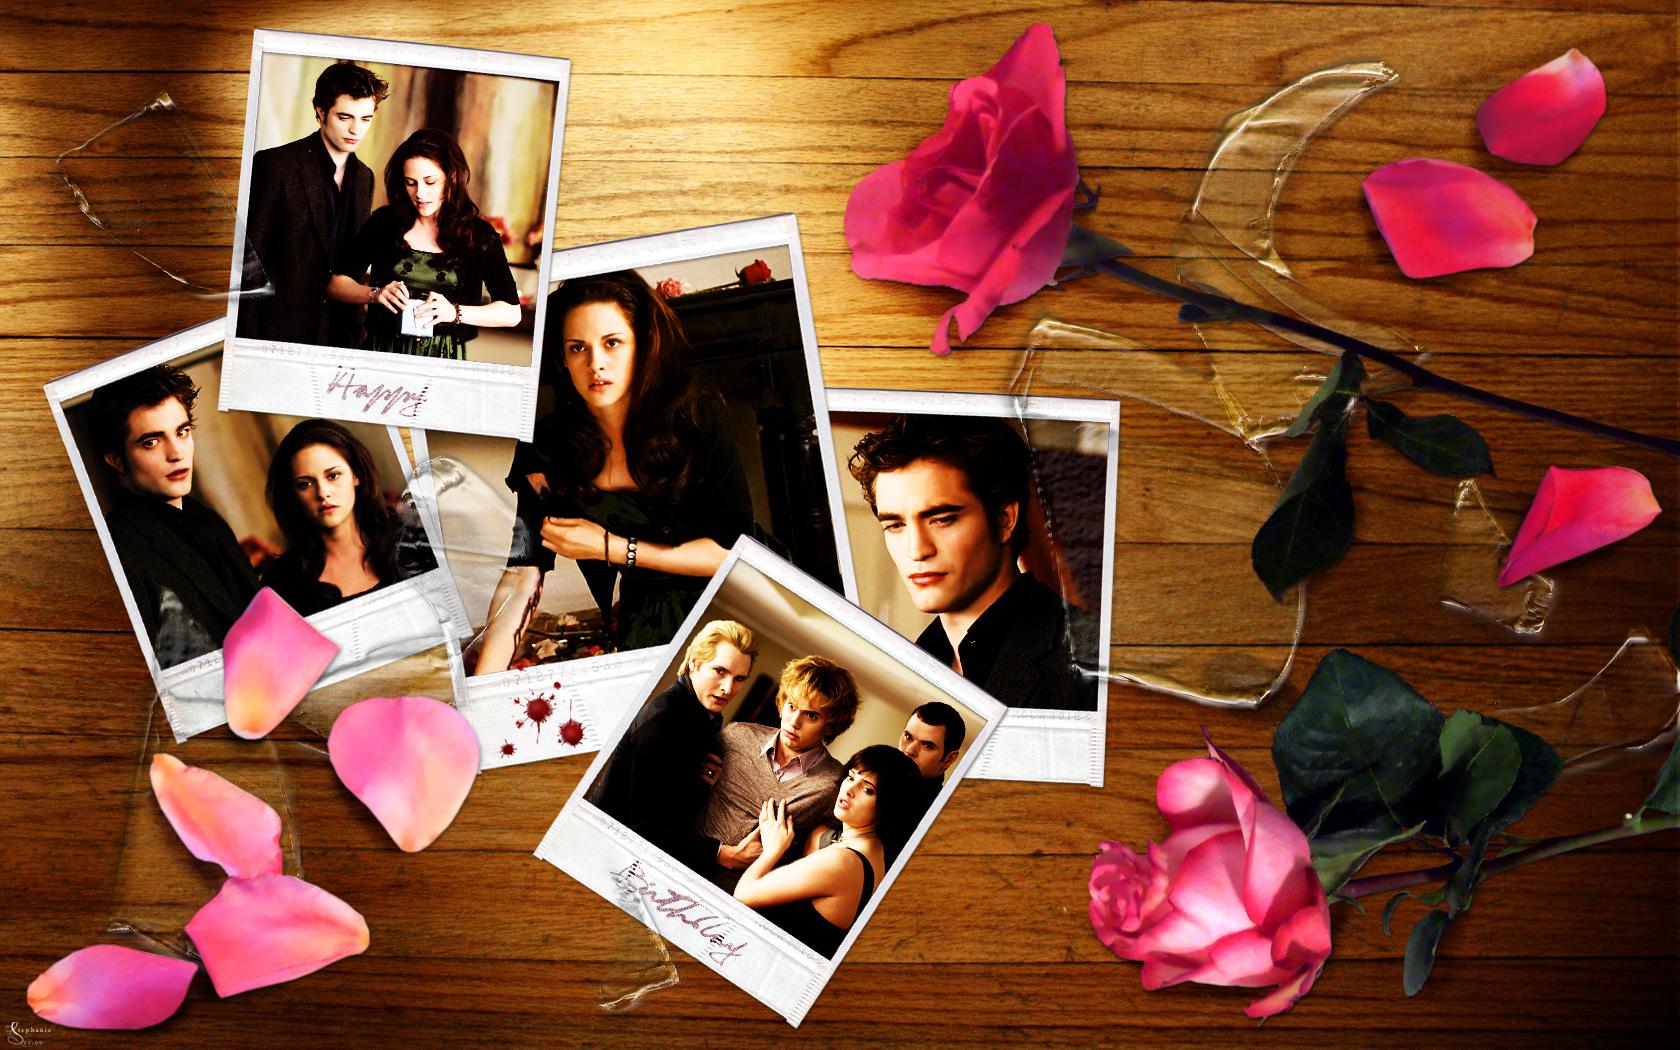 New Moon Twilight Images Download